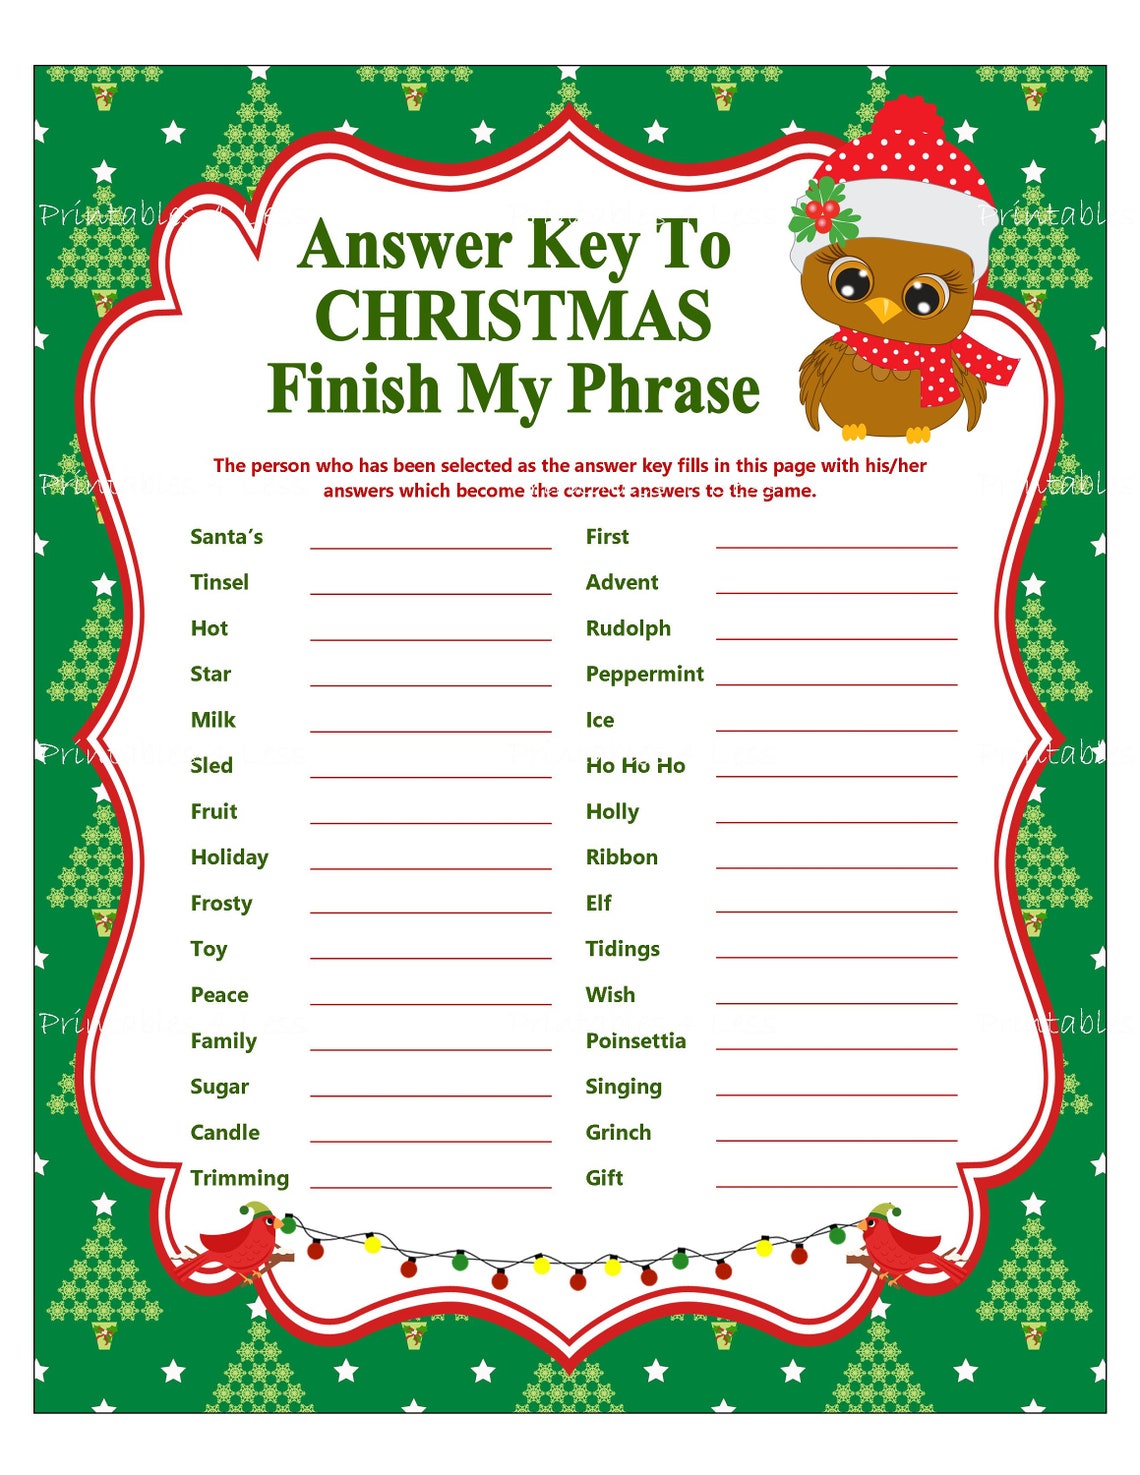 Christmas Finish My Phrase Holiday Party Games Printable | Etsy